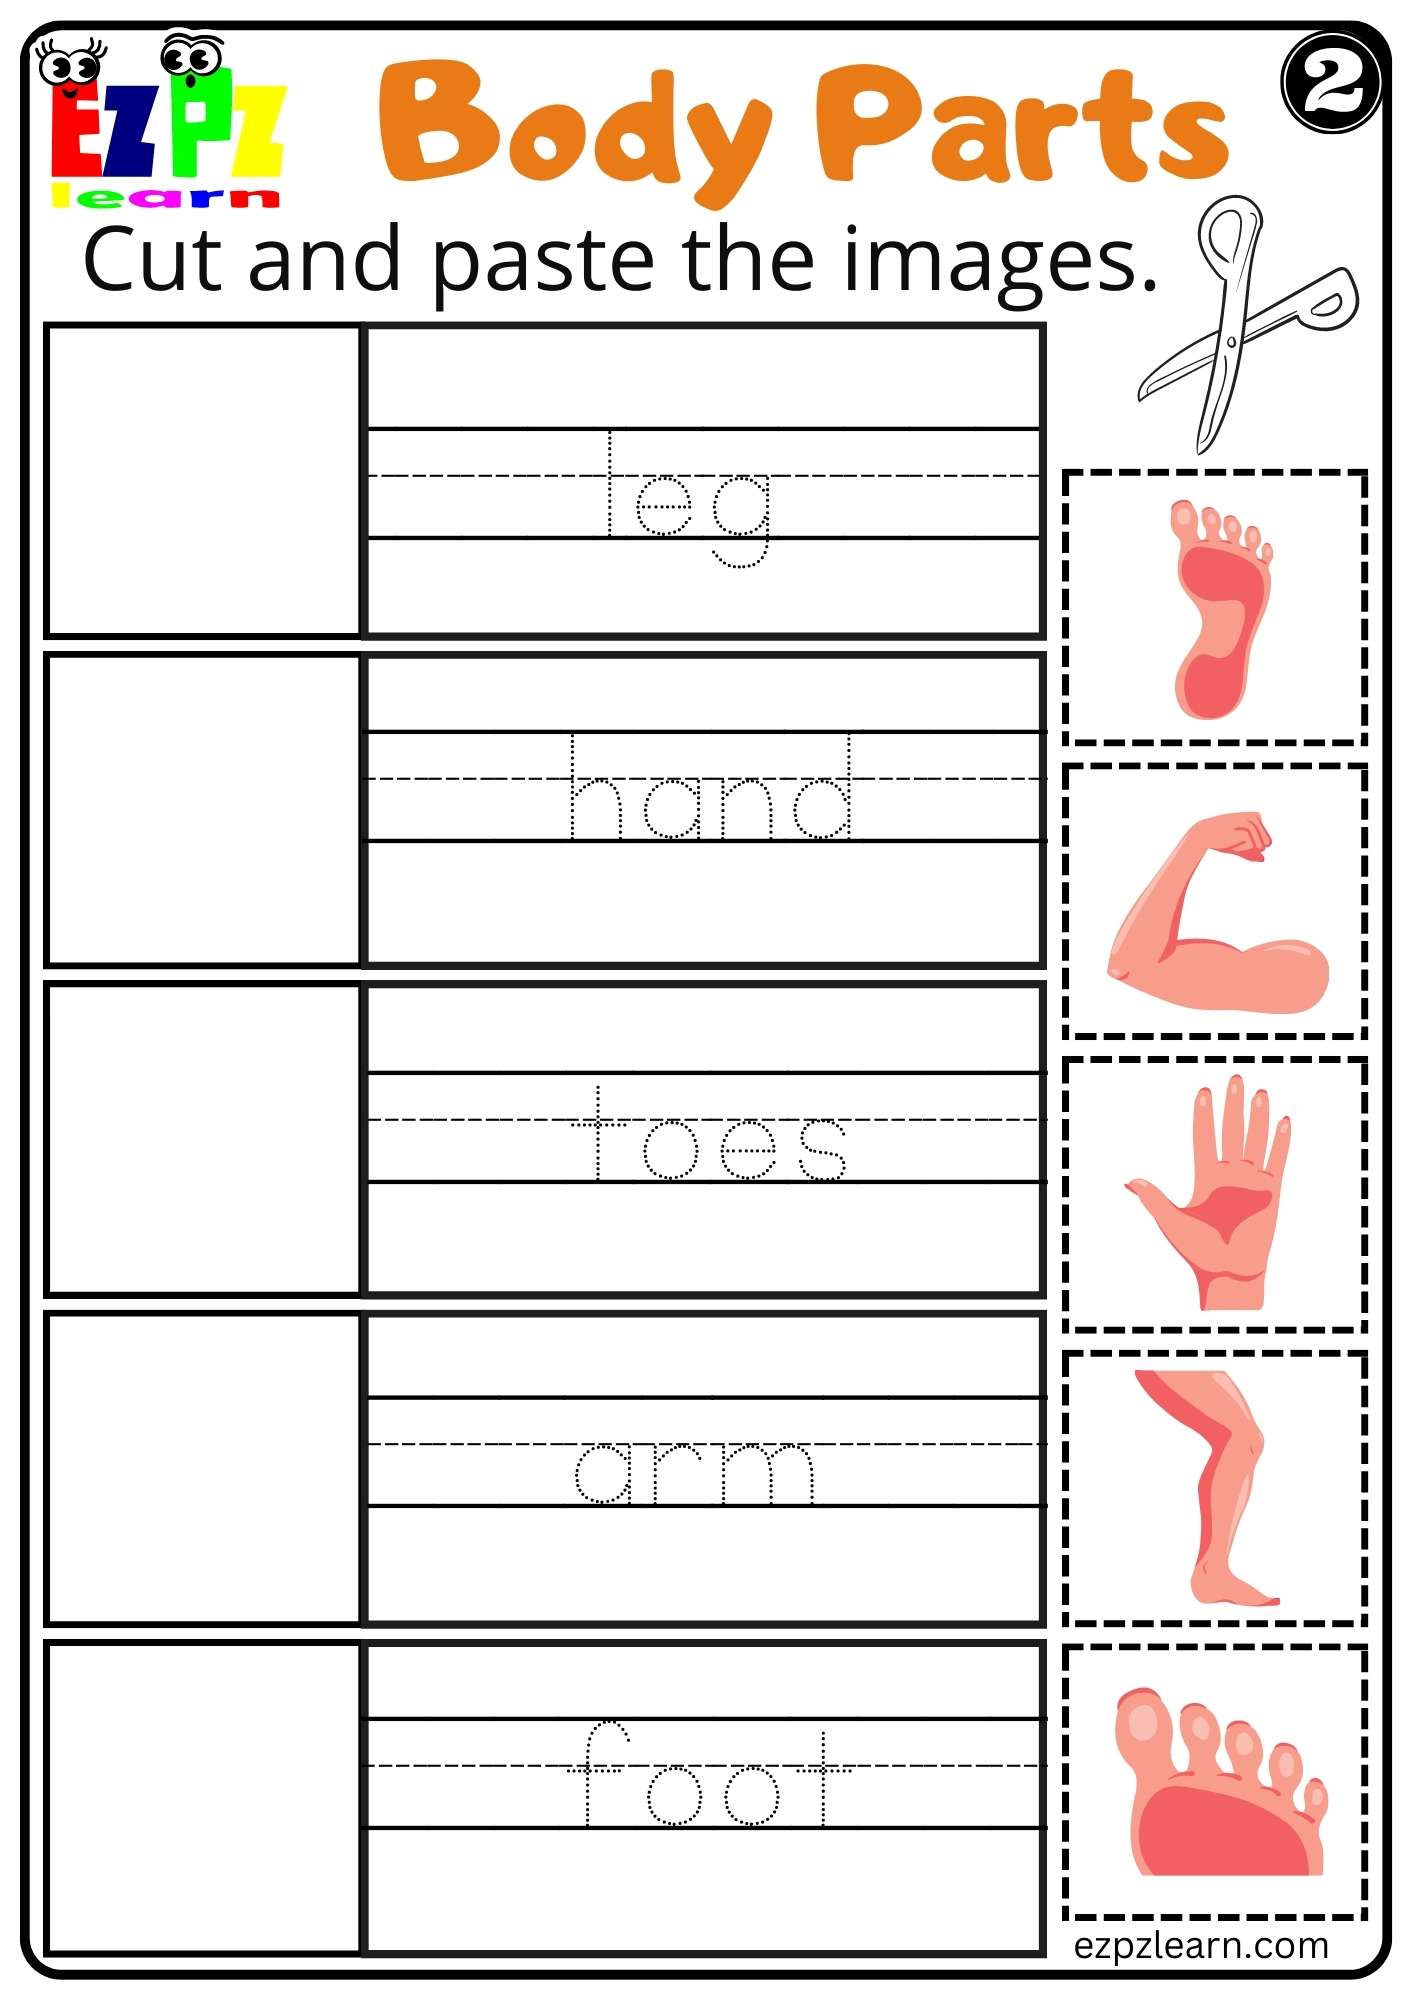 body-parts-cut-and-paste-worksheets-for-kids-and-esl-pdf-download-set-2